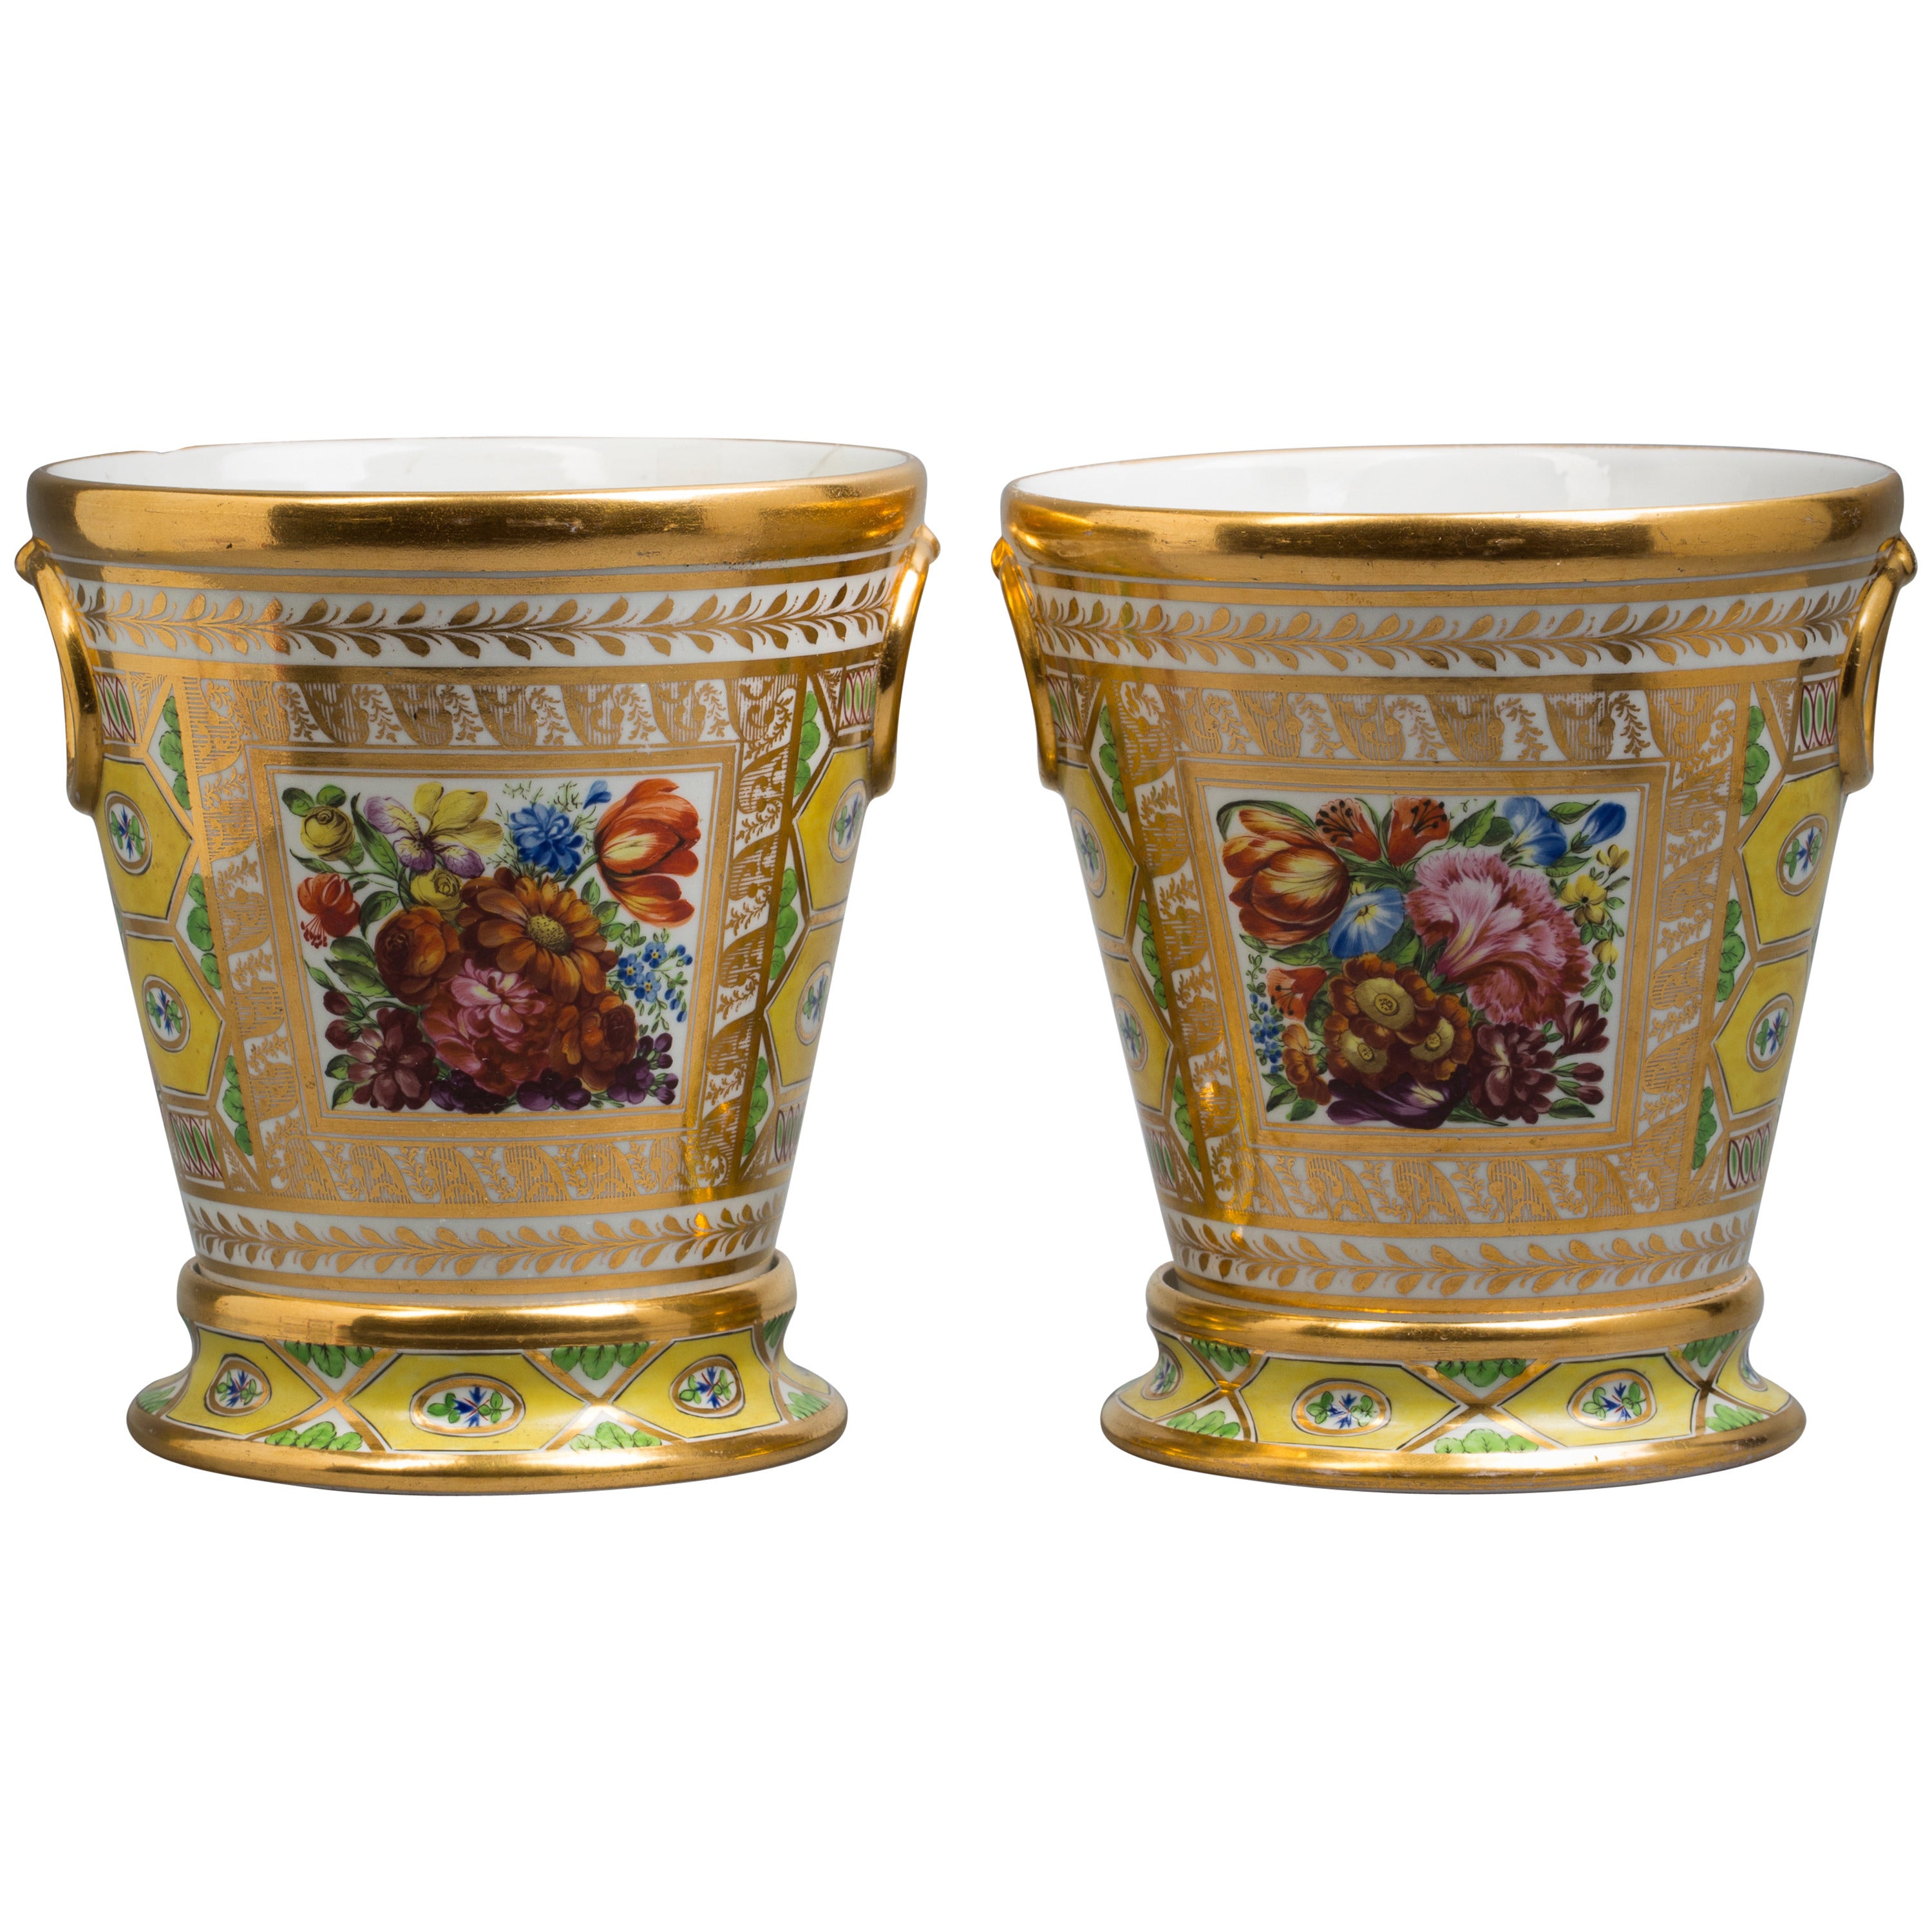 Pair of English Porcelain Cachepots on Stands, Coalport, circa 1820 For Sale